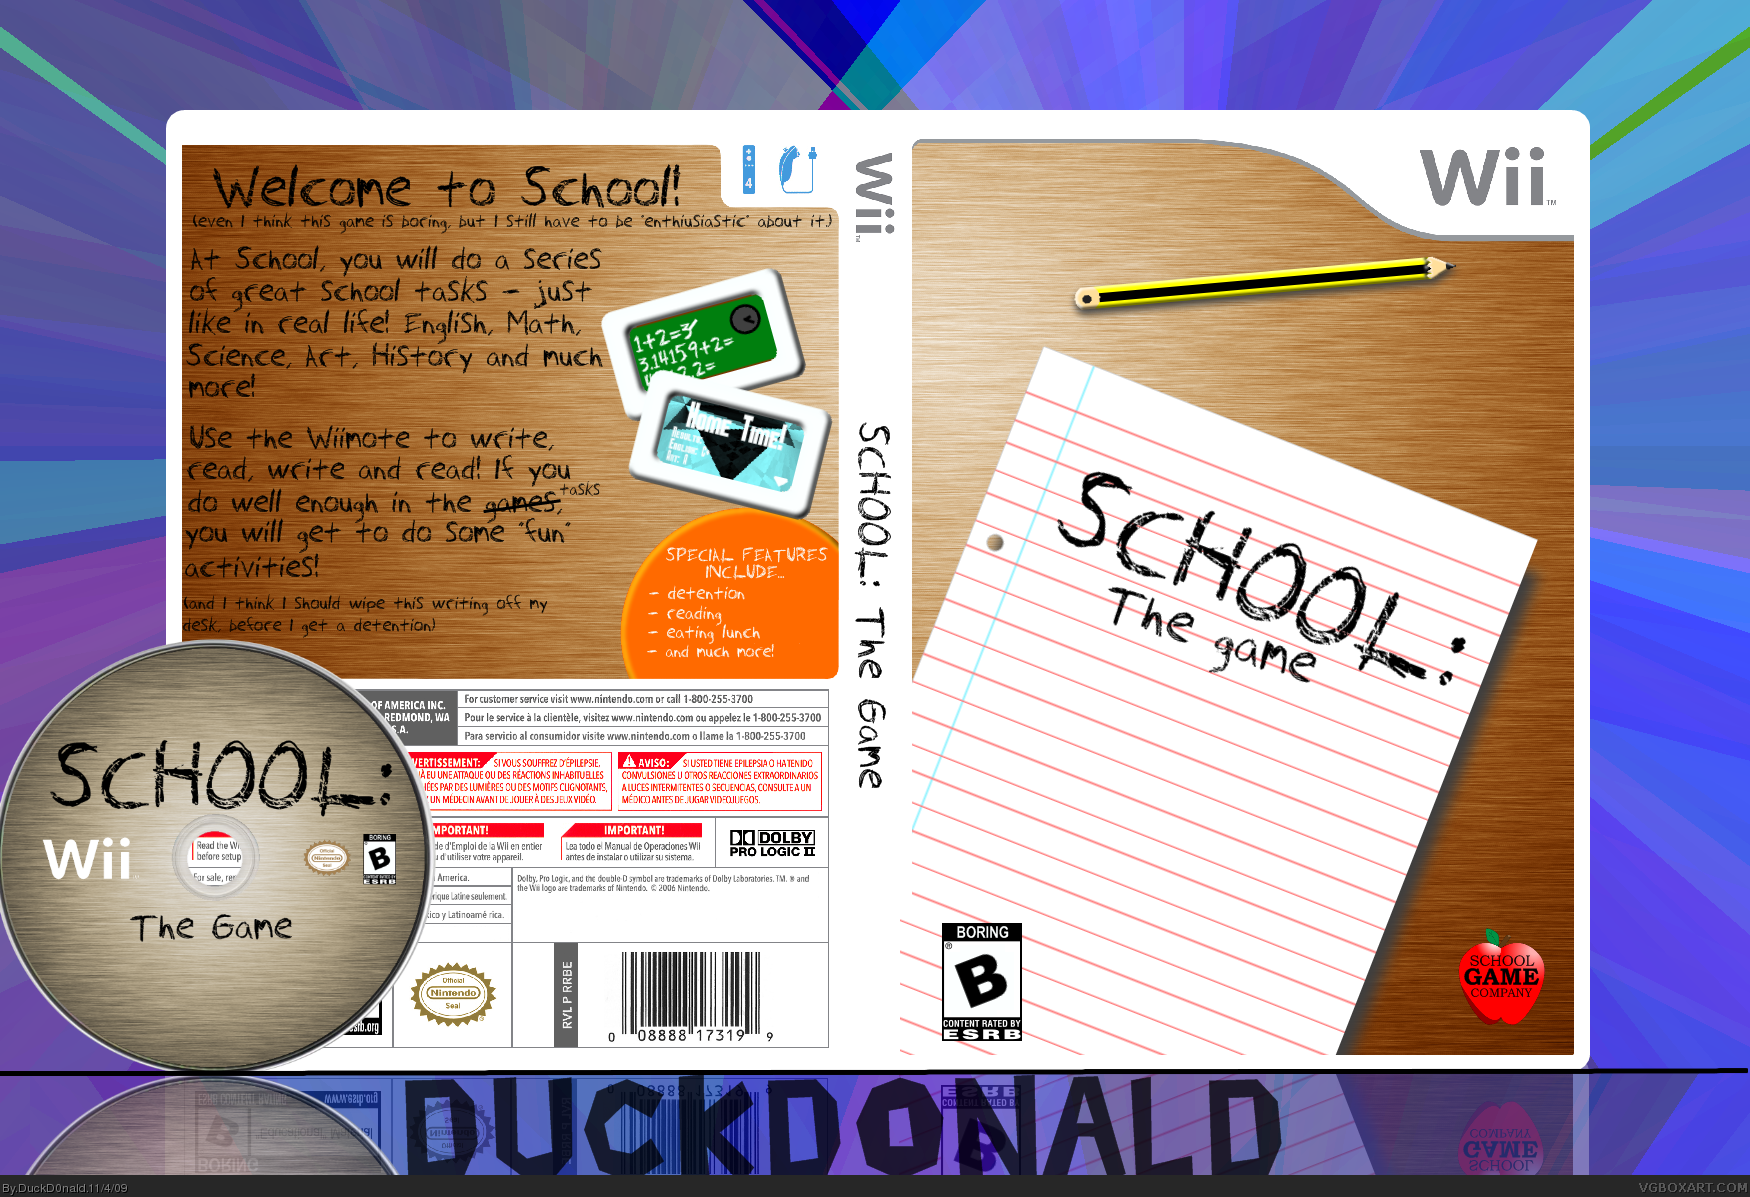 School: The Game box cover